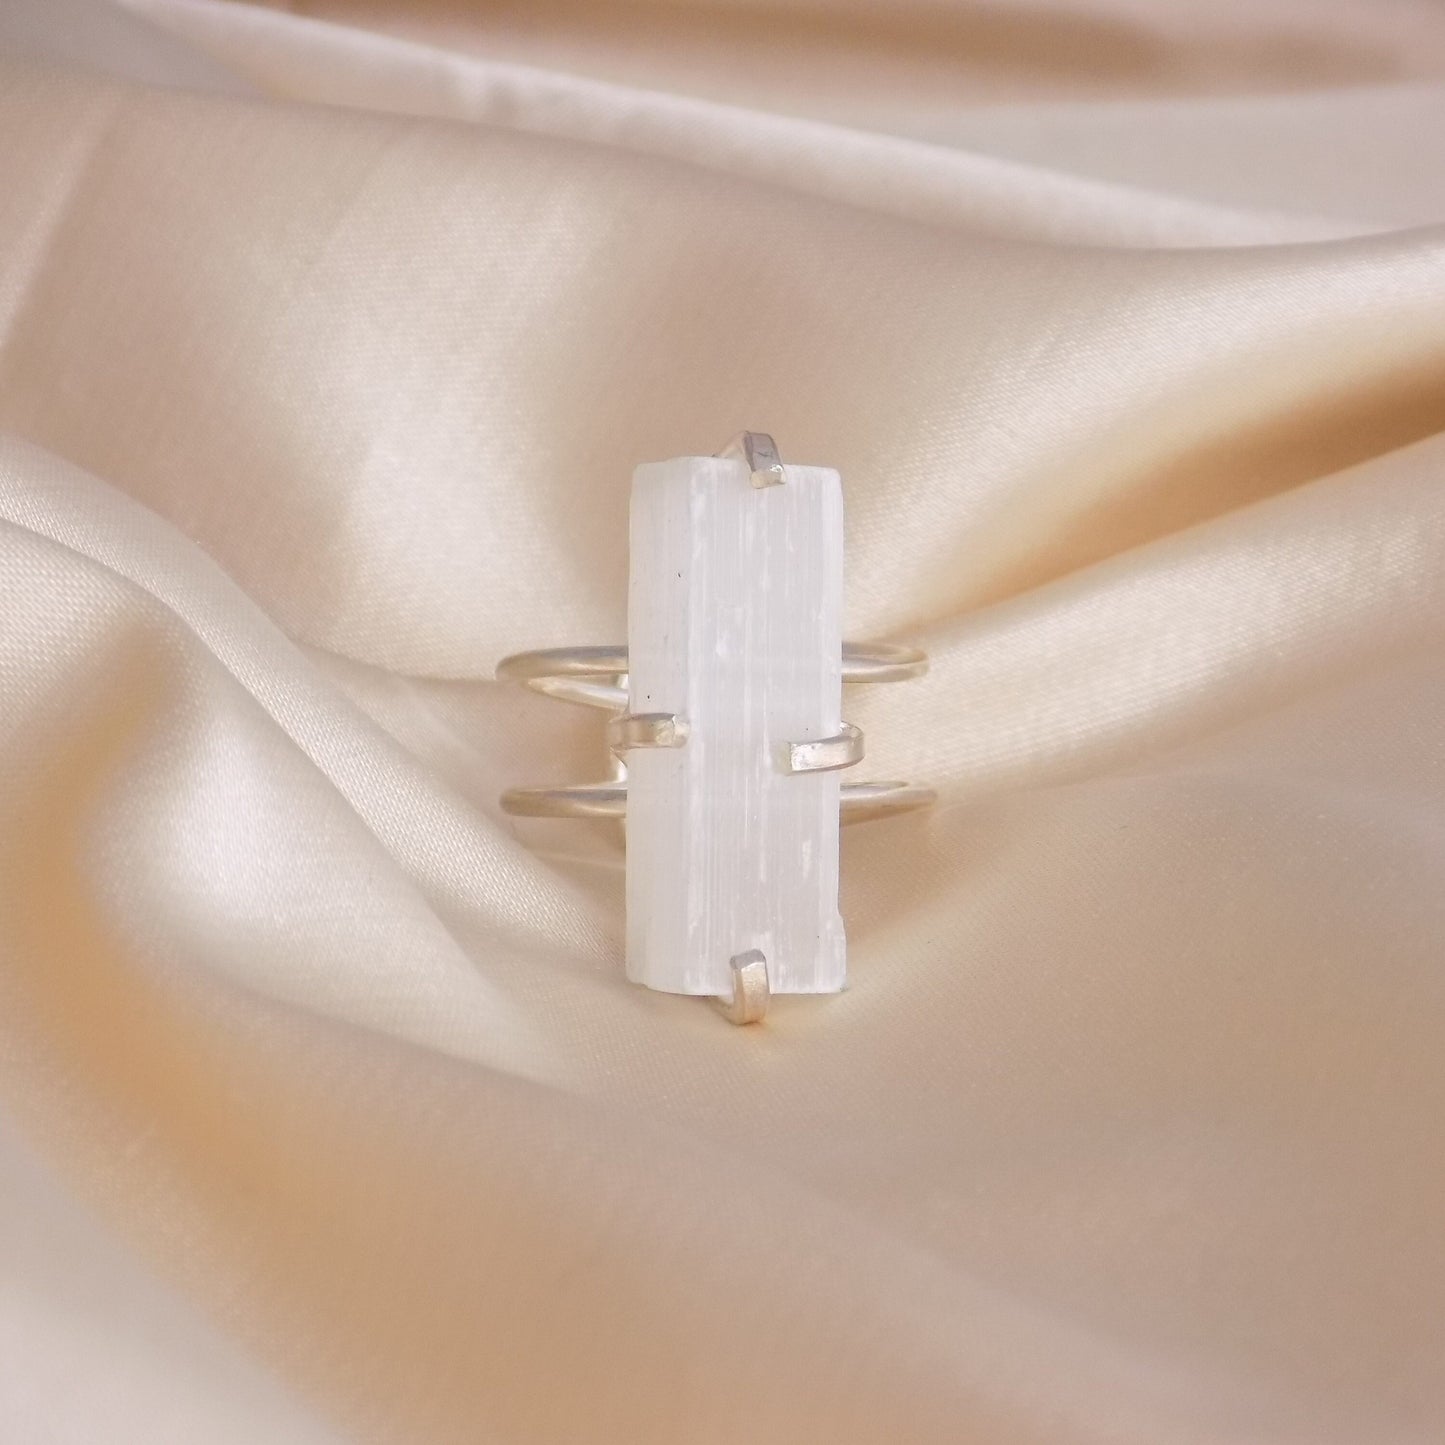 White Selenite Ring Silver Adjustable, Cleansing Healing Crystal Rings for Women, Christmas Gifts For Her, G15-177